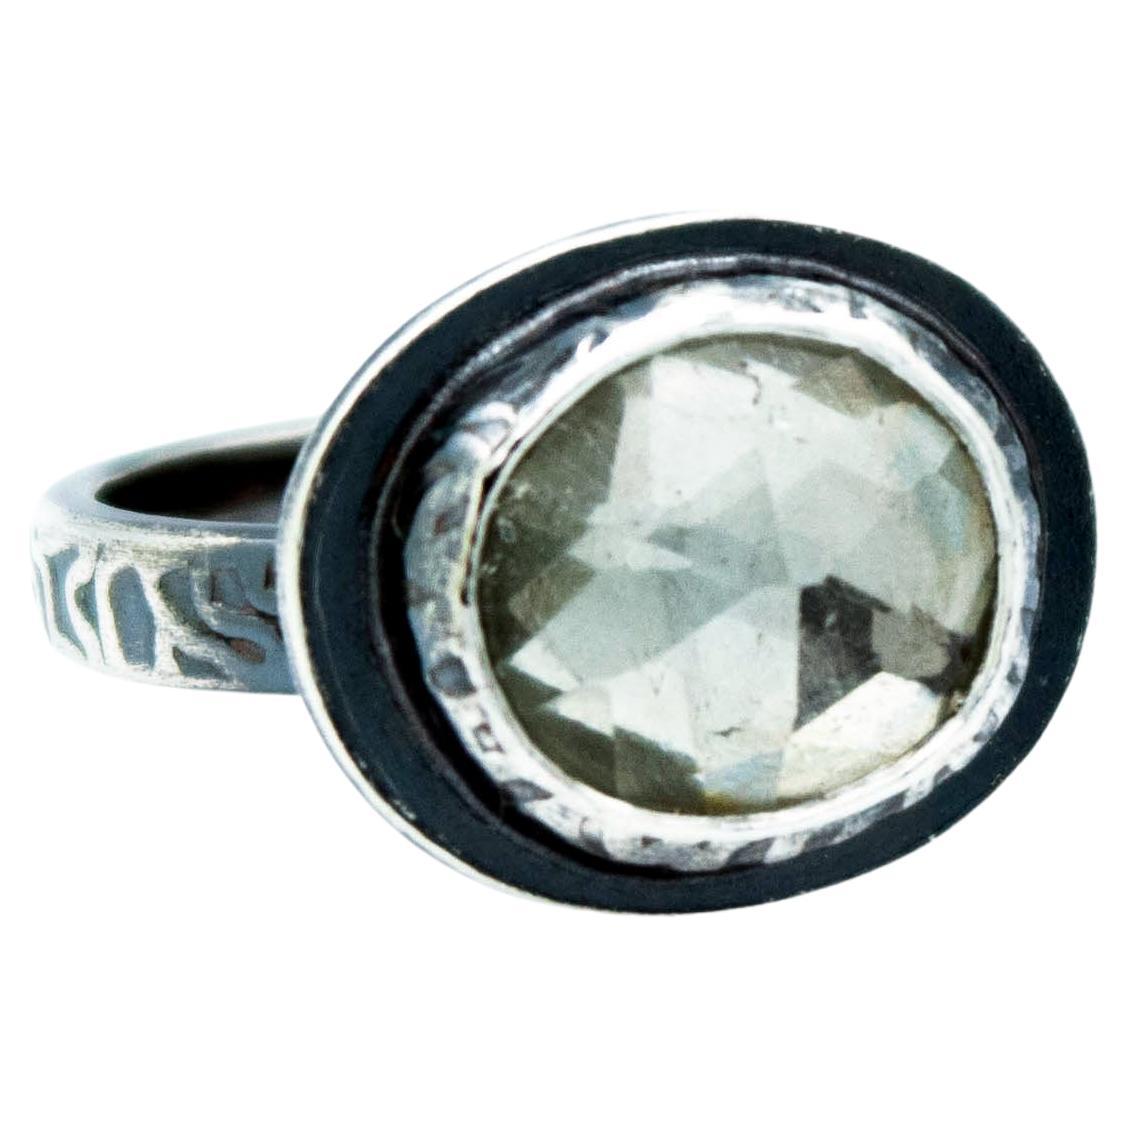 Sterling Silver Topaz Abyss Ring by TIN HAUS